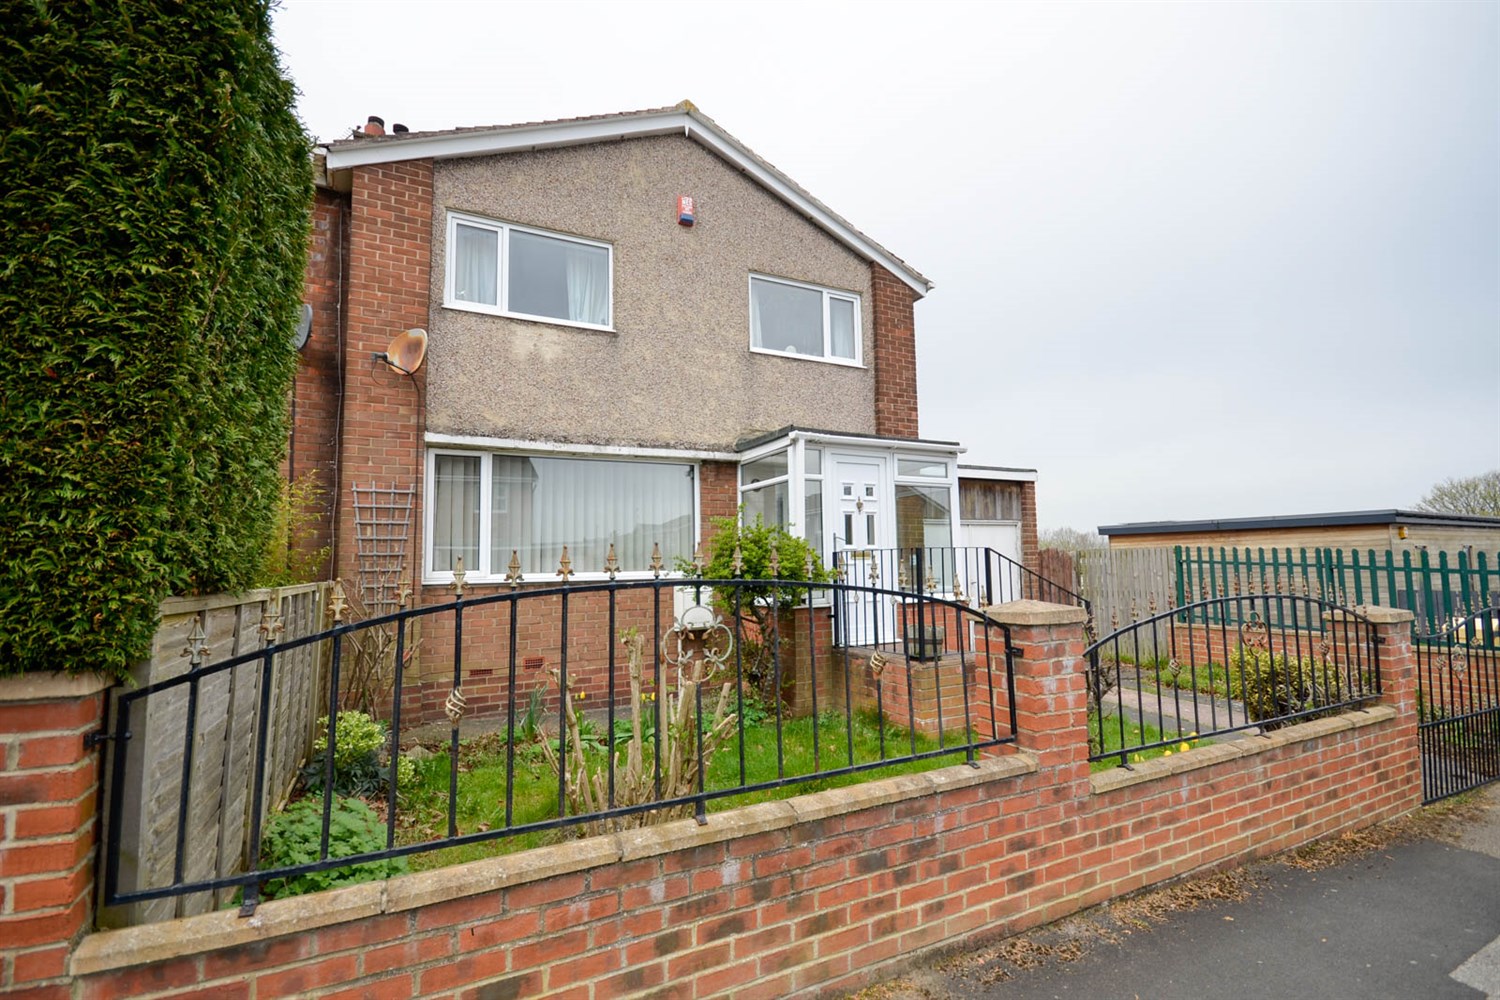 3 bed semi-detached house for sale in Ouston, Chester Le Street - Property Image 1